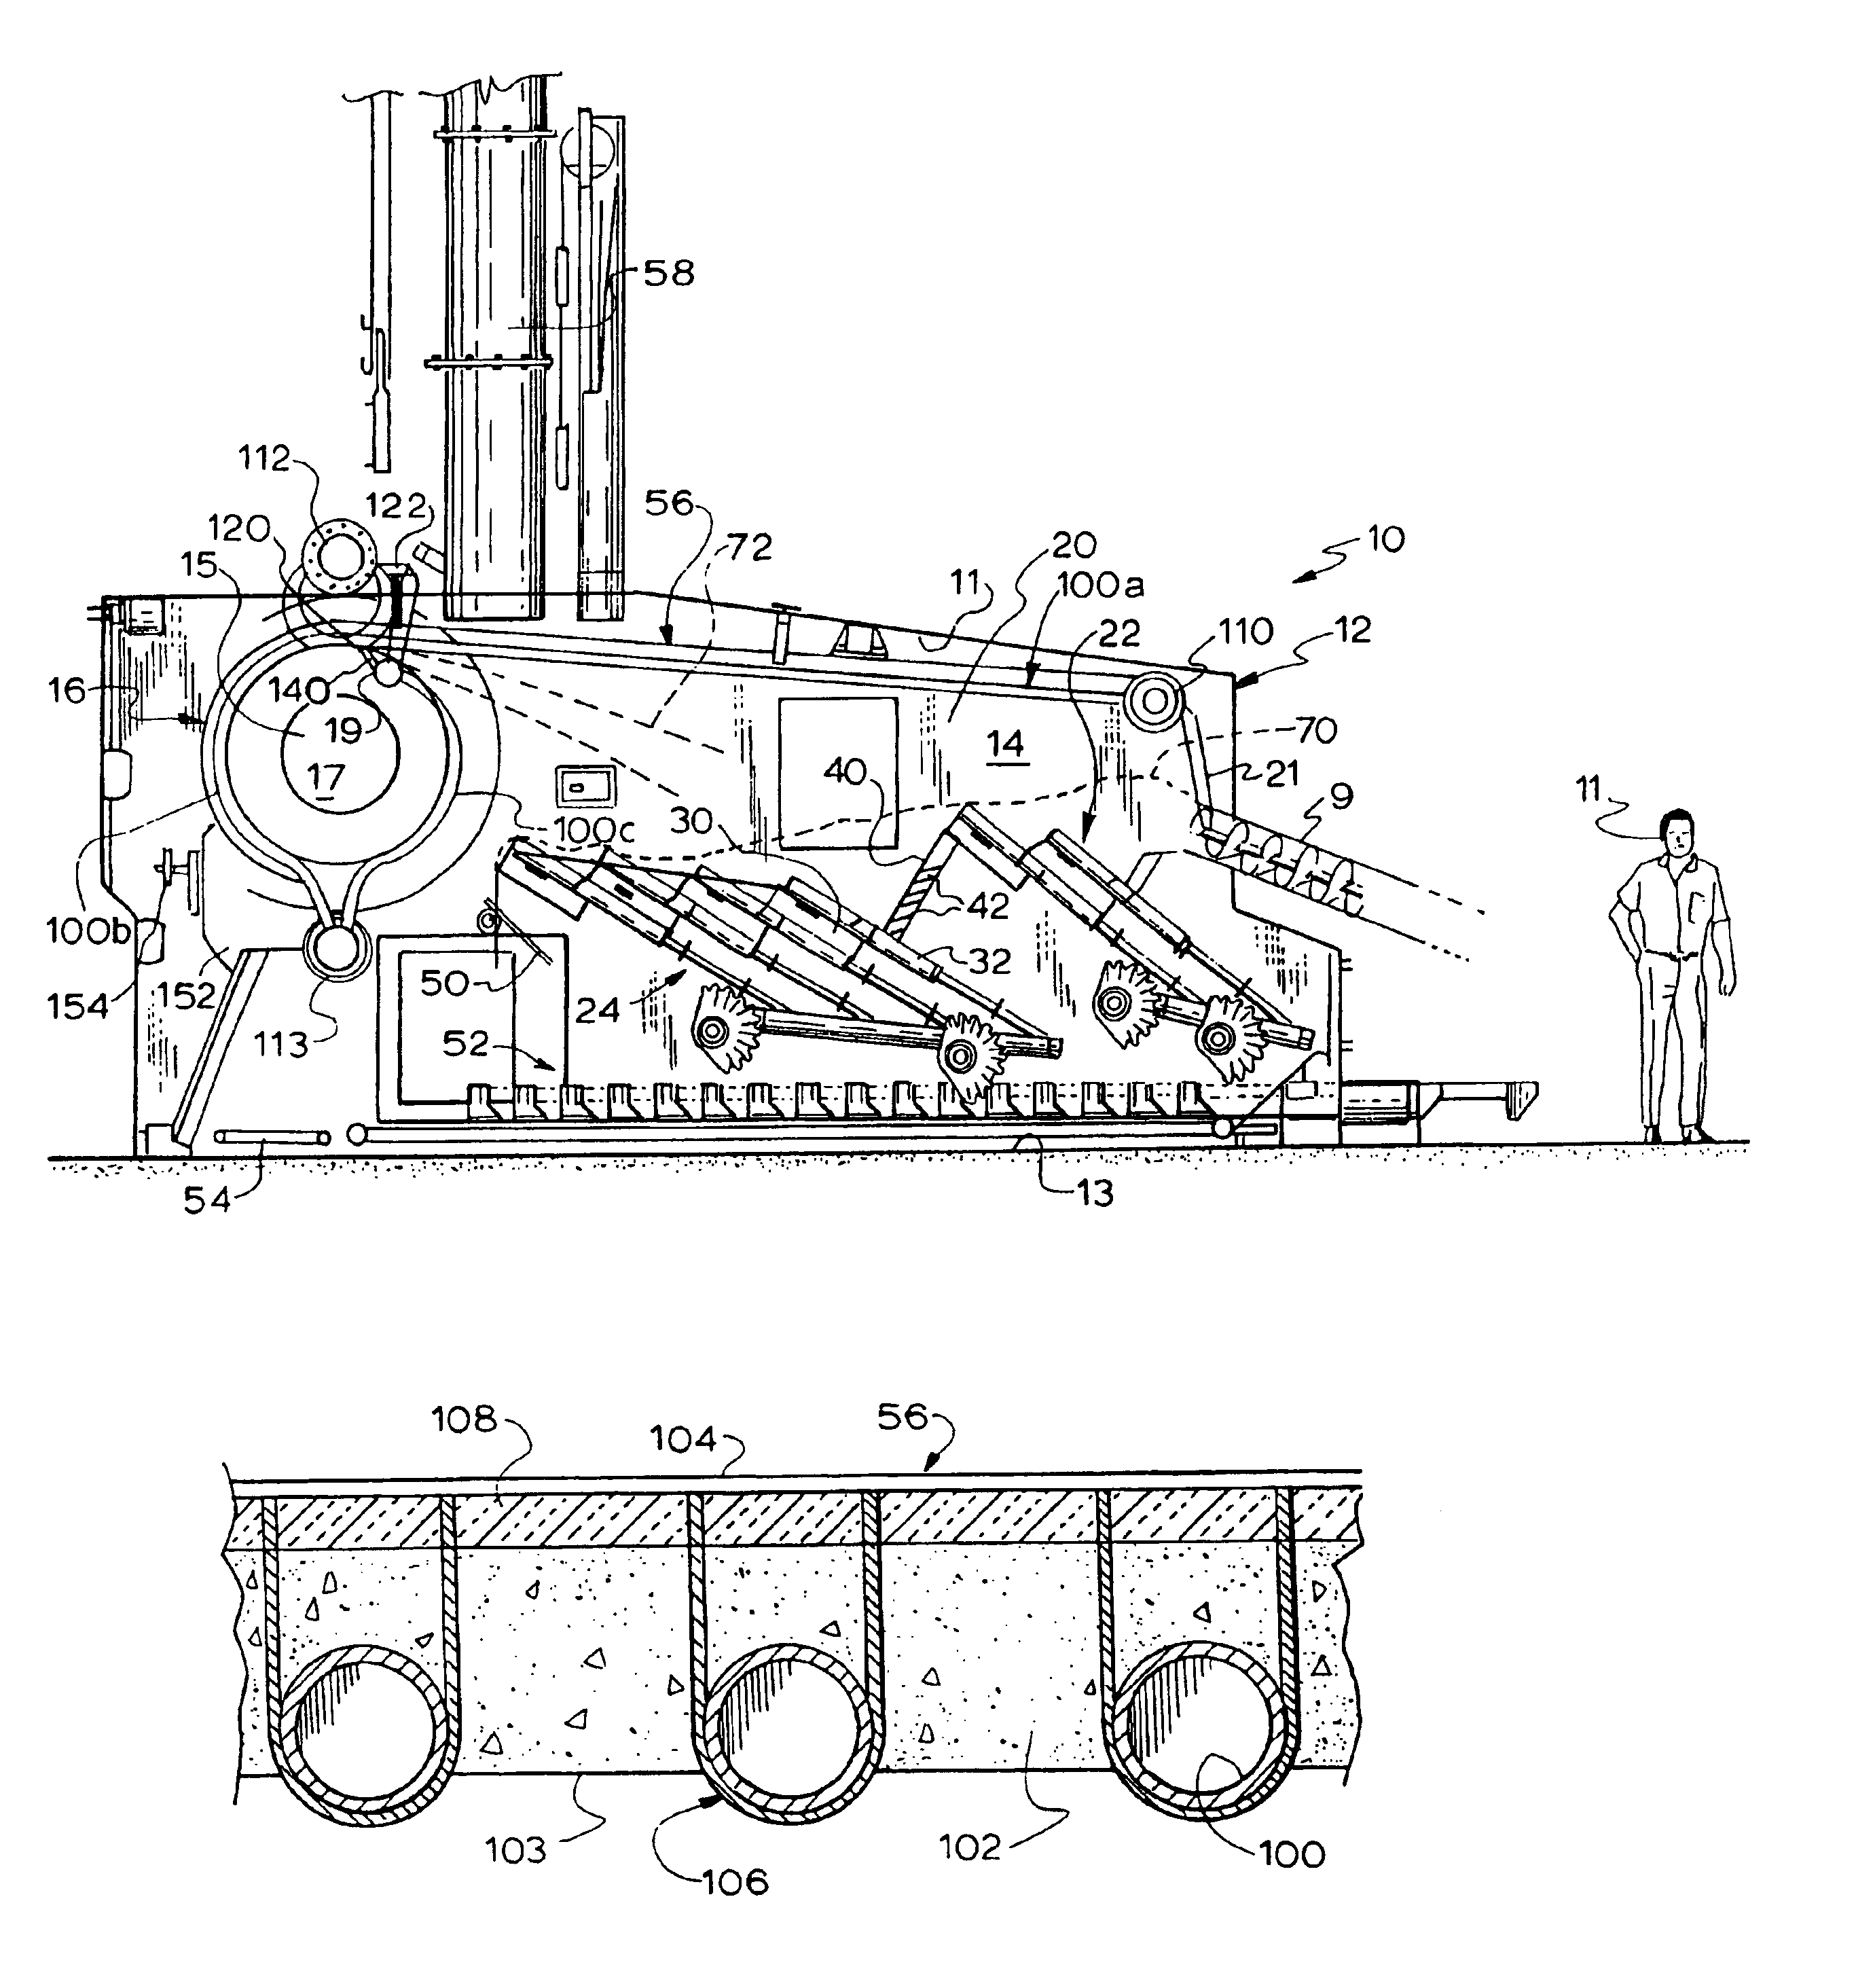 Refractory wall structure and damper device